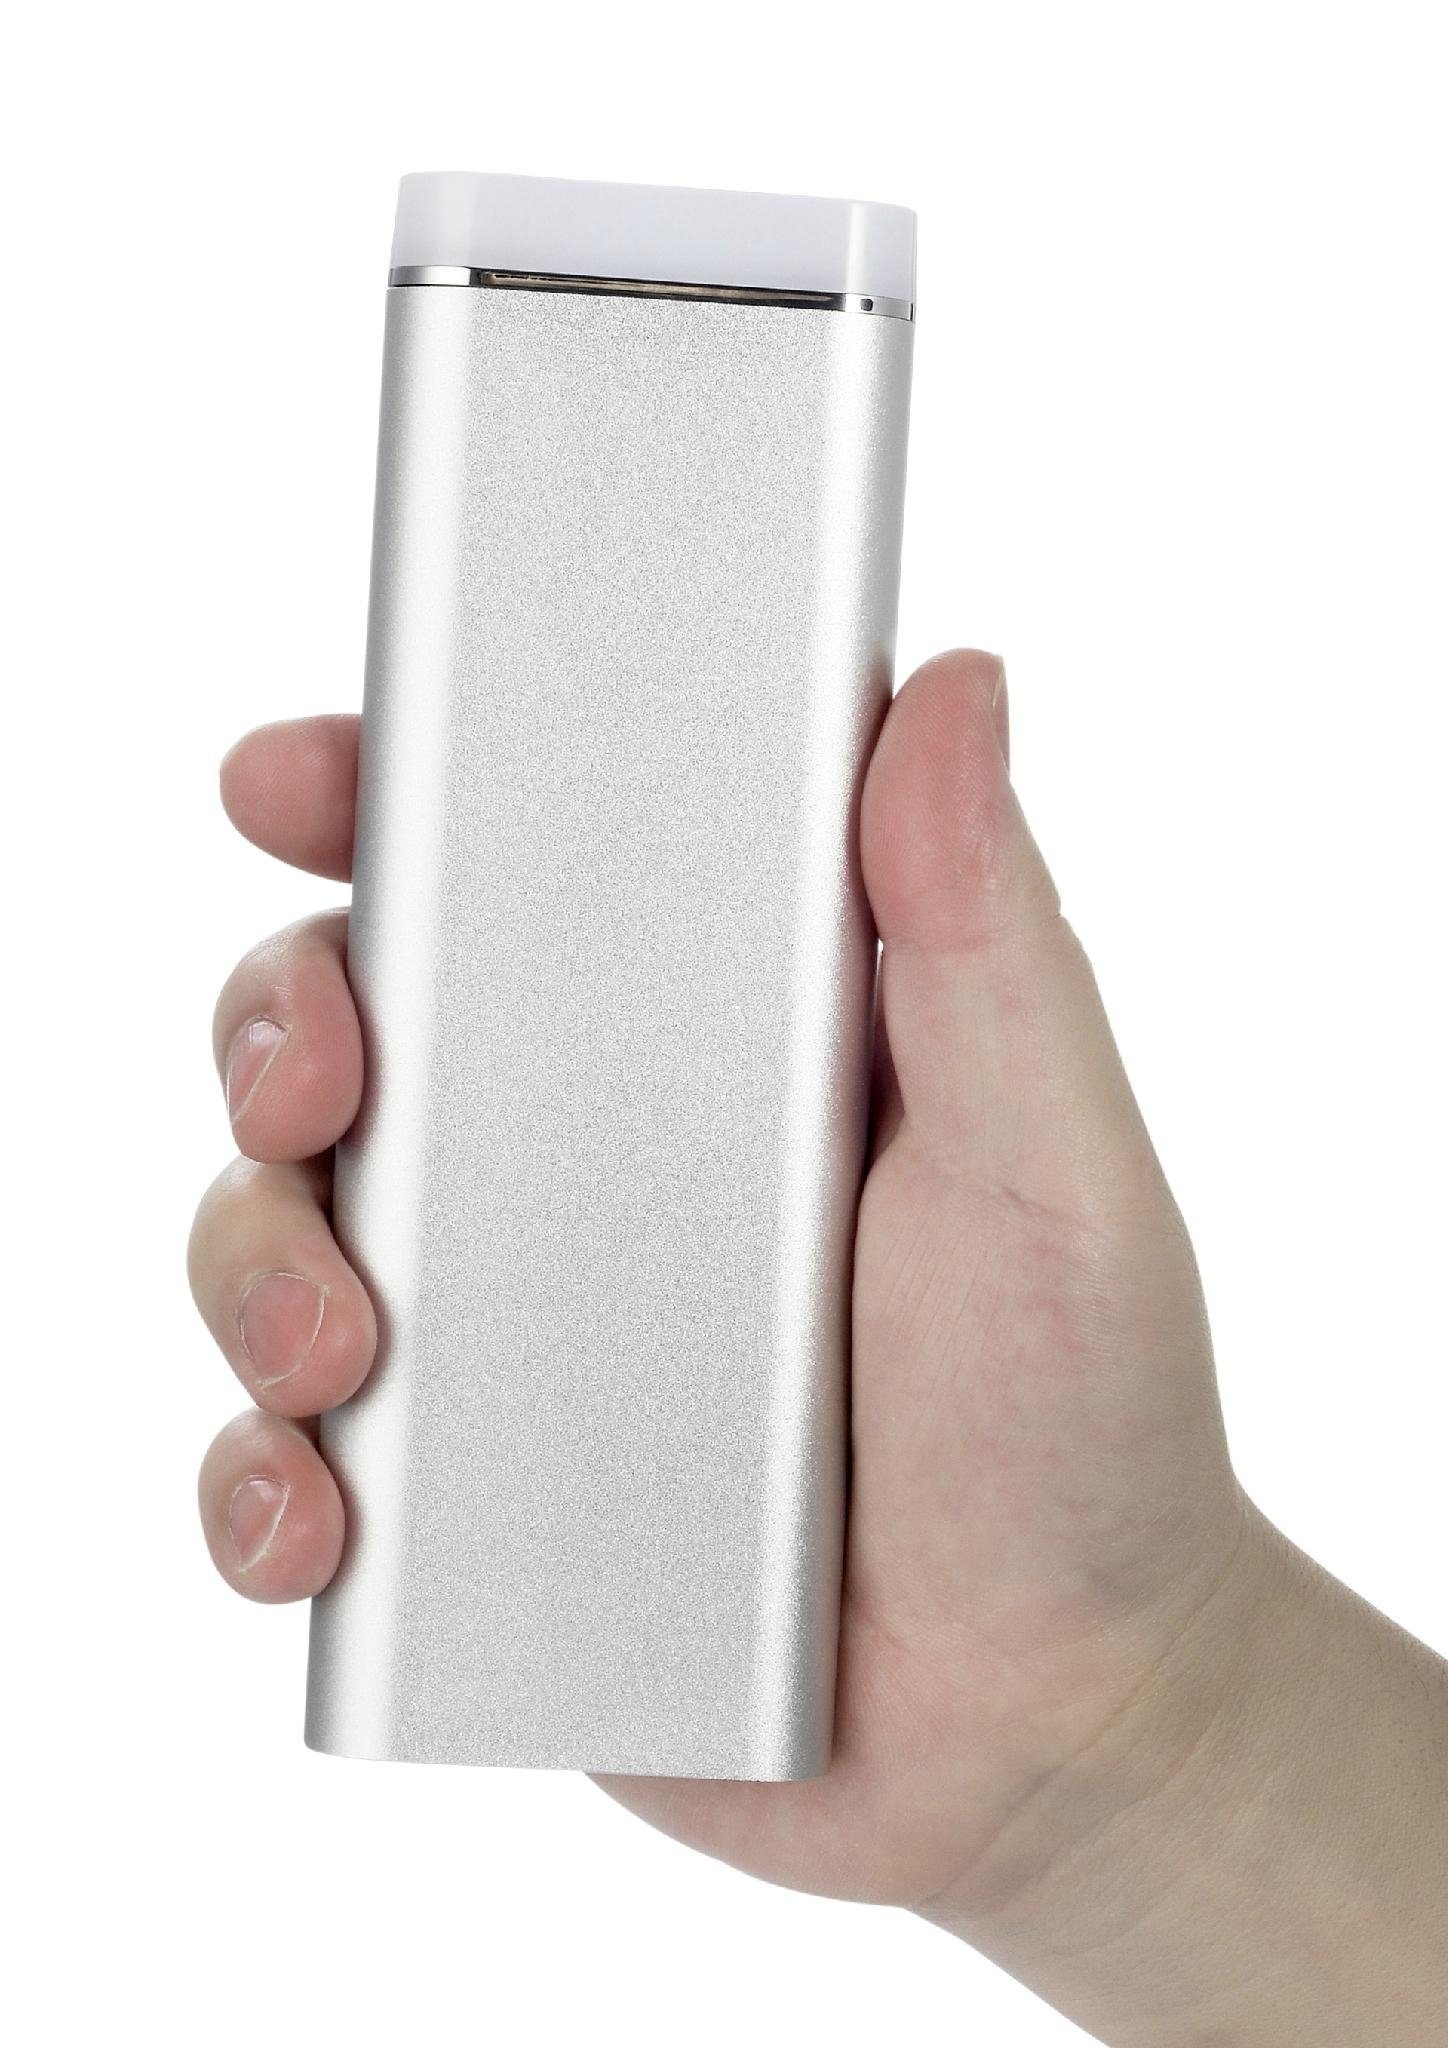 Multi-function Aluminum alloy mobile power bank with LED lamp 3